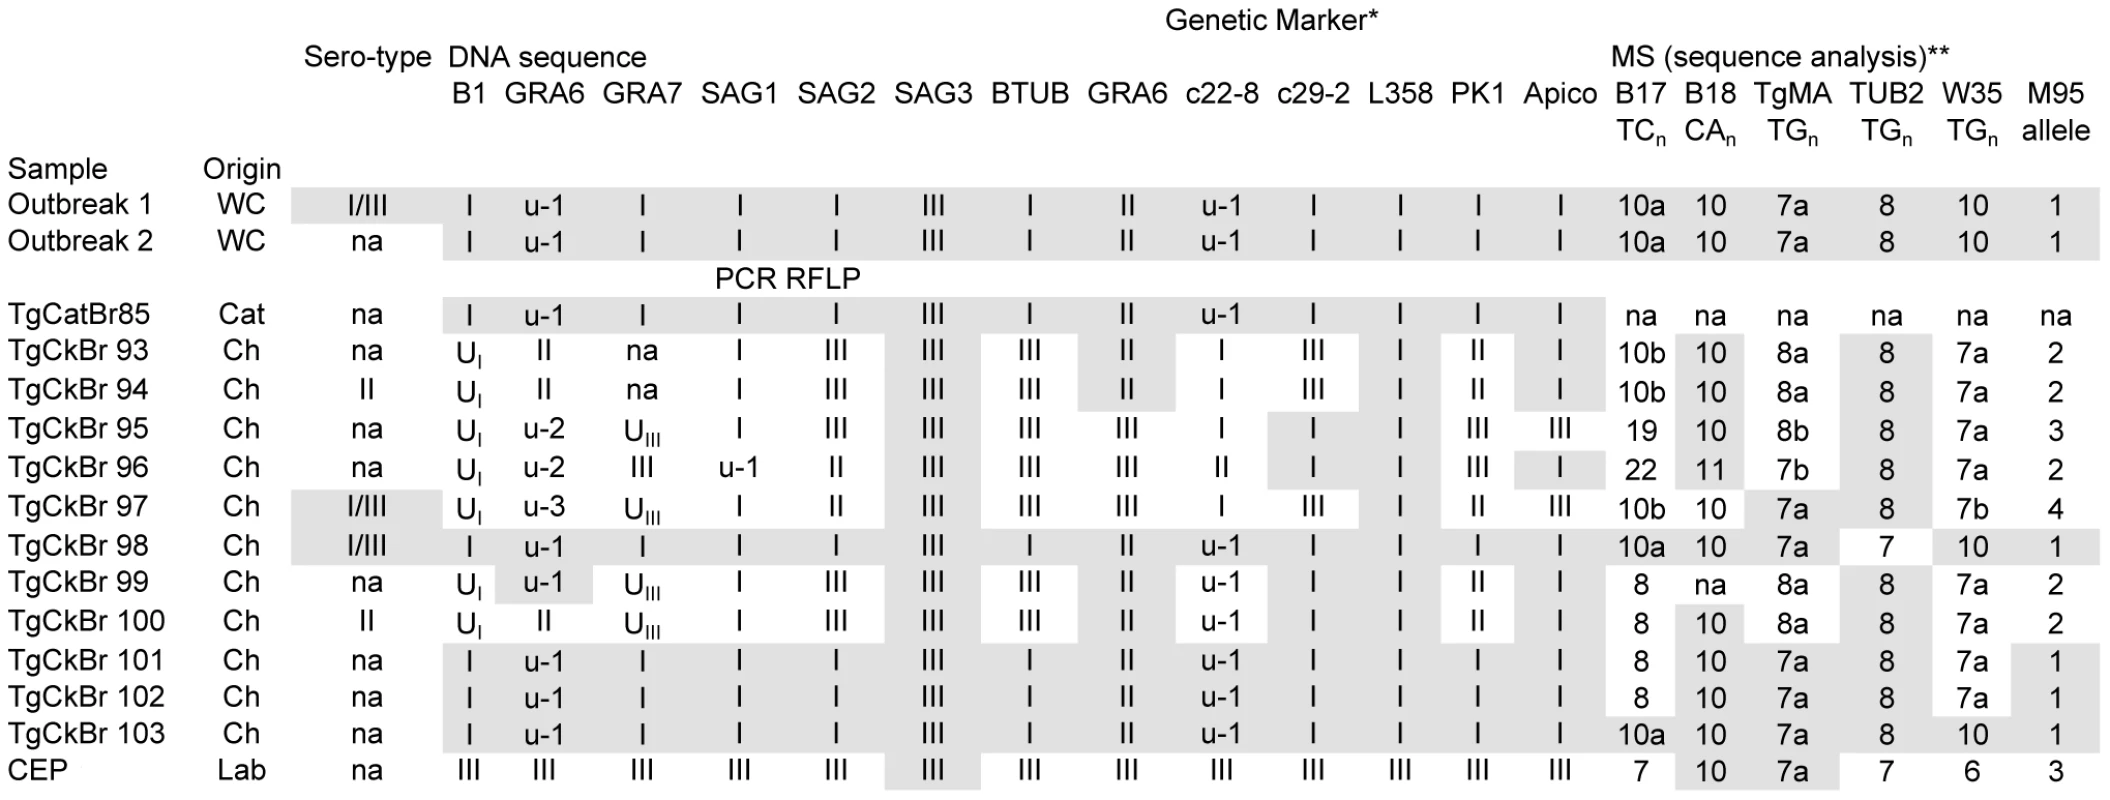 Genotype analysis of <i>Toxoplasma gondii</i> strains associated with an outbreak in Santa Isabel do Ivai, Brazil.